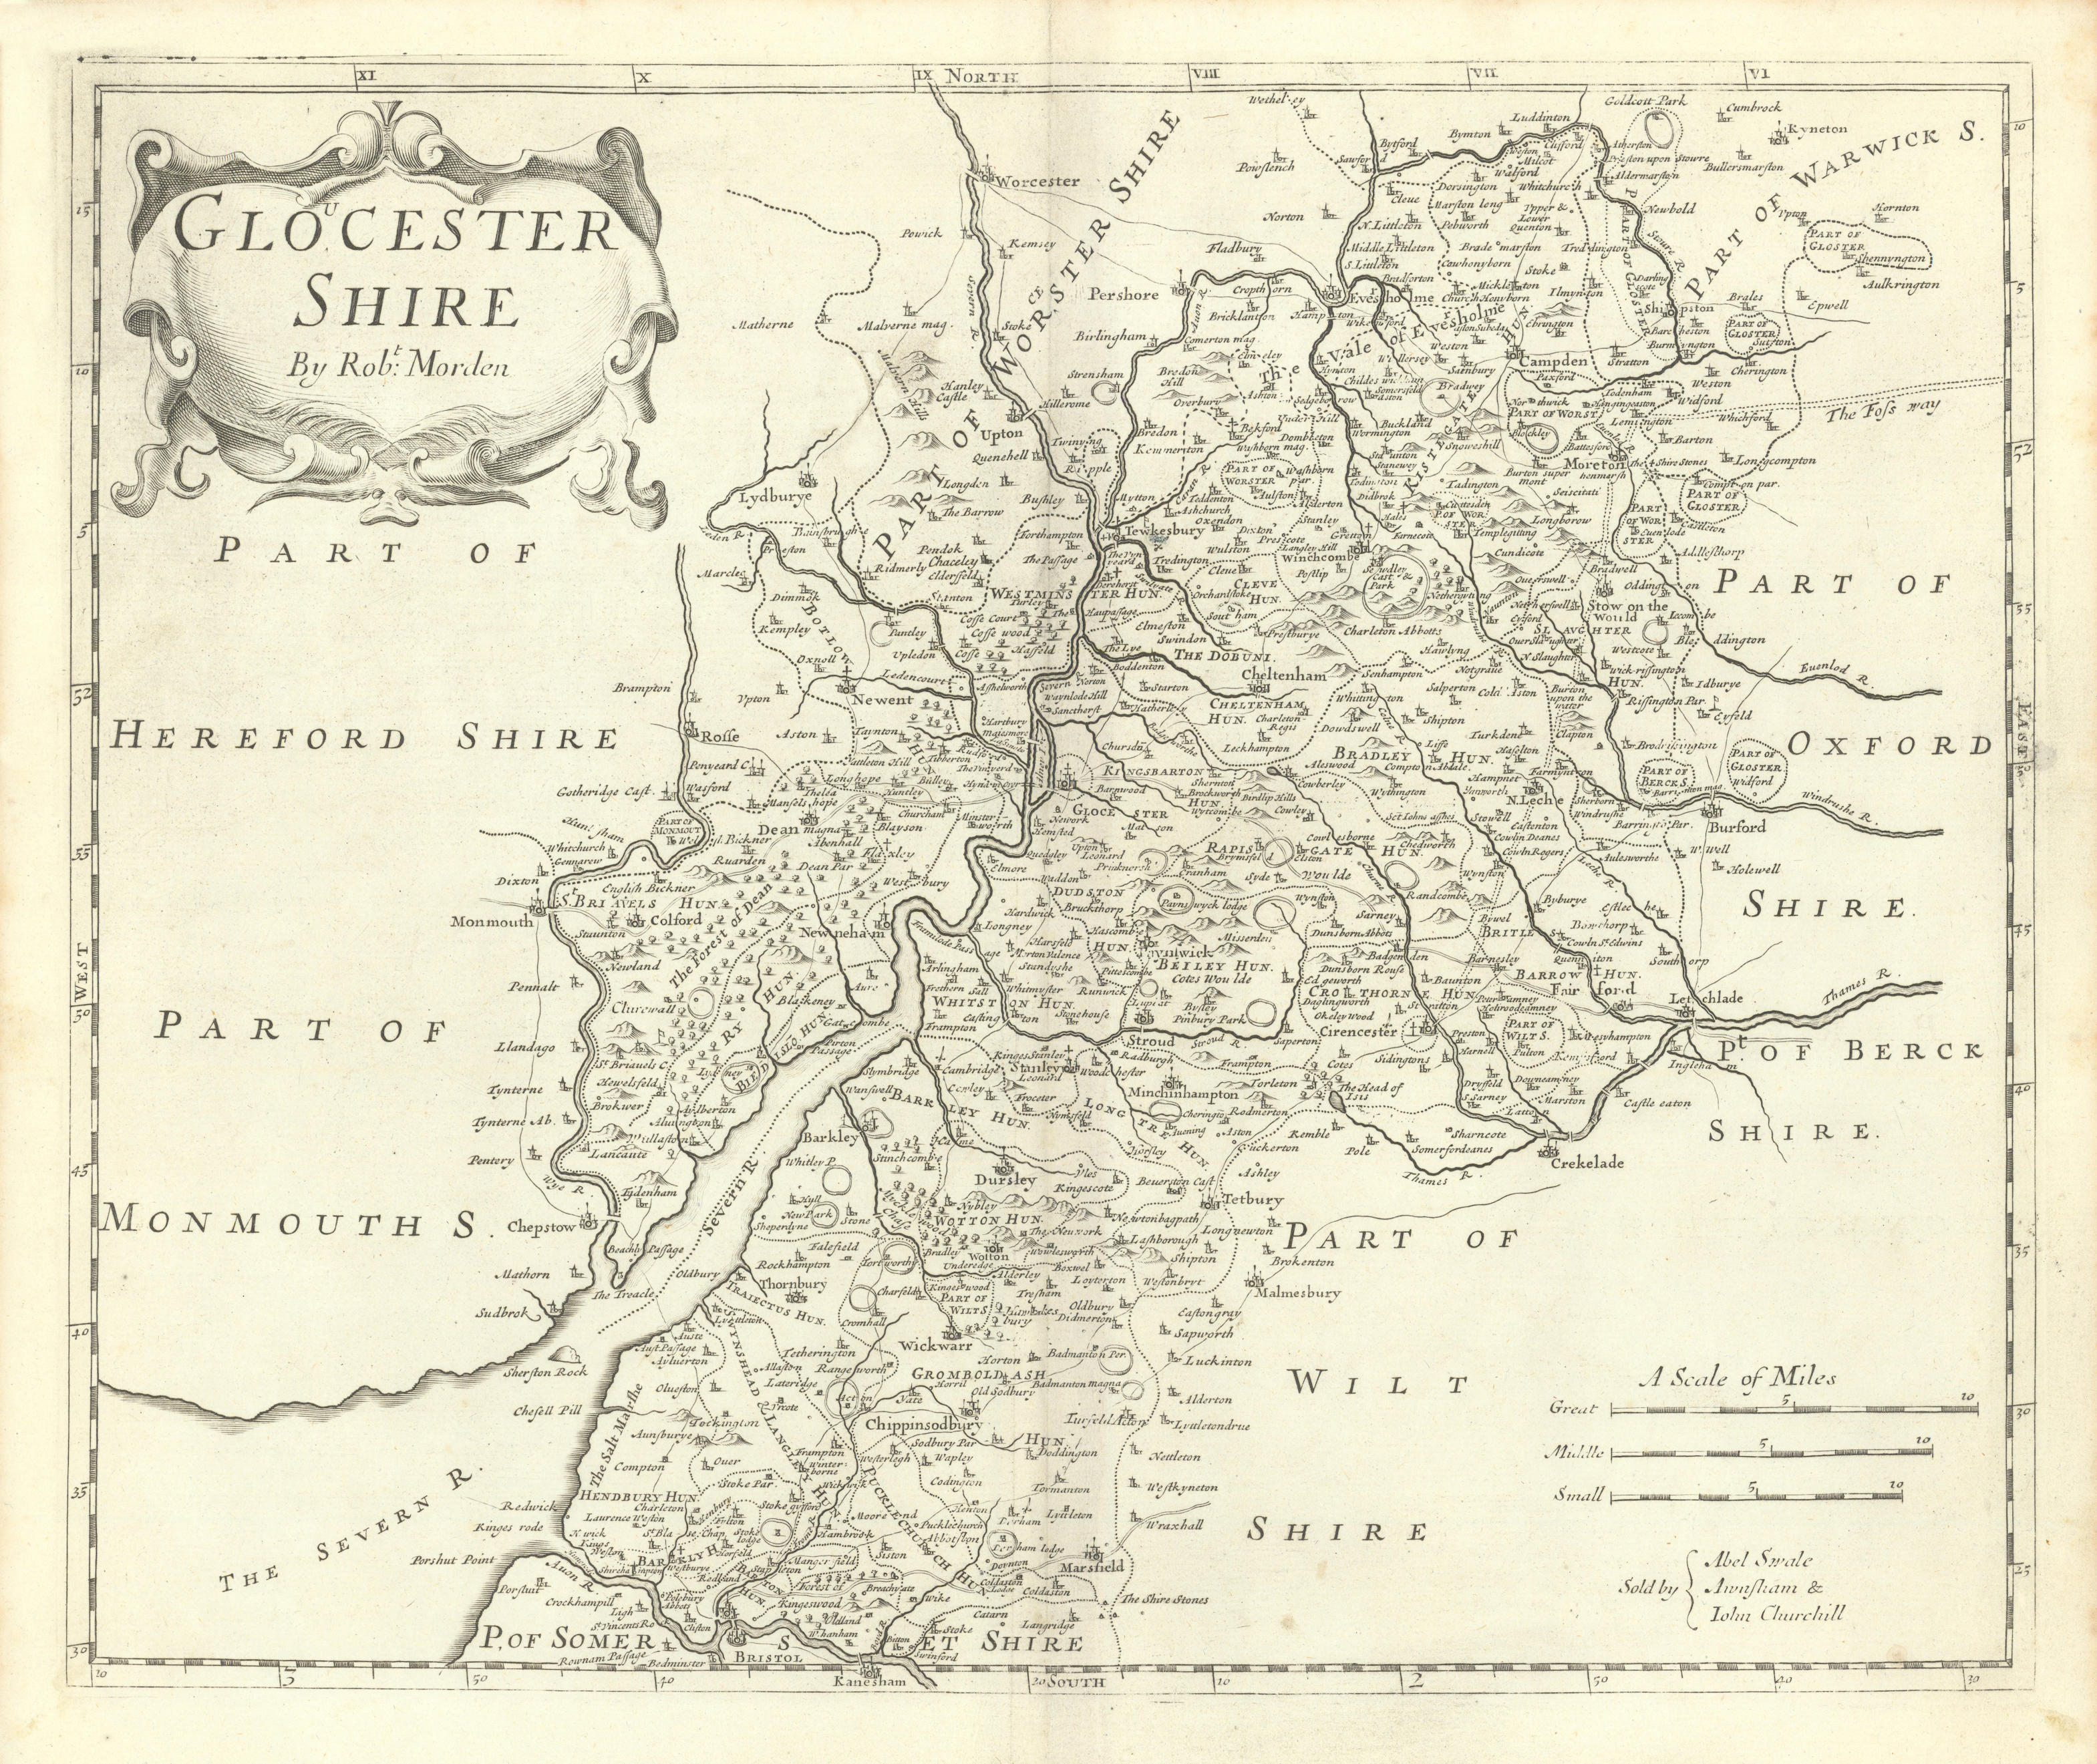 Associate Product GLOUCESTERSHIRE by ROBERT MORDEN from Camden's Britannia 1722 old antique map